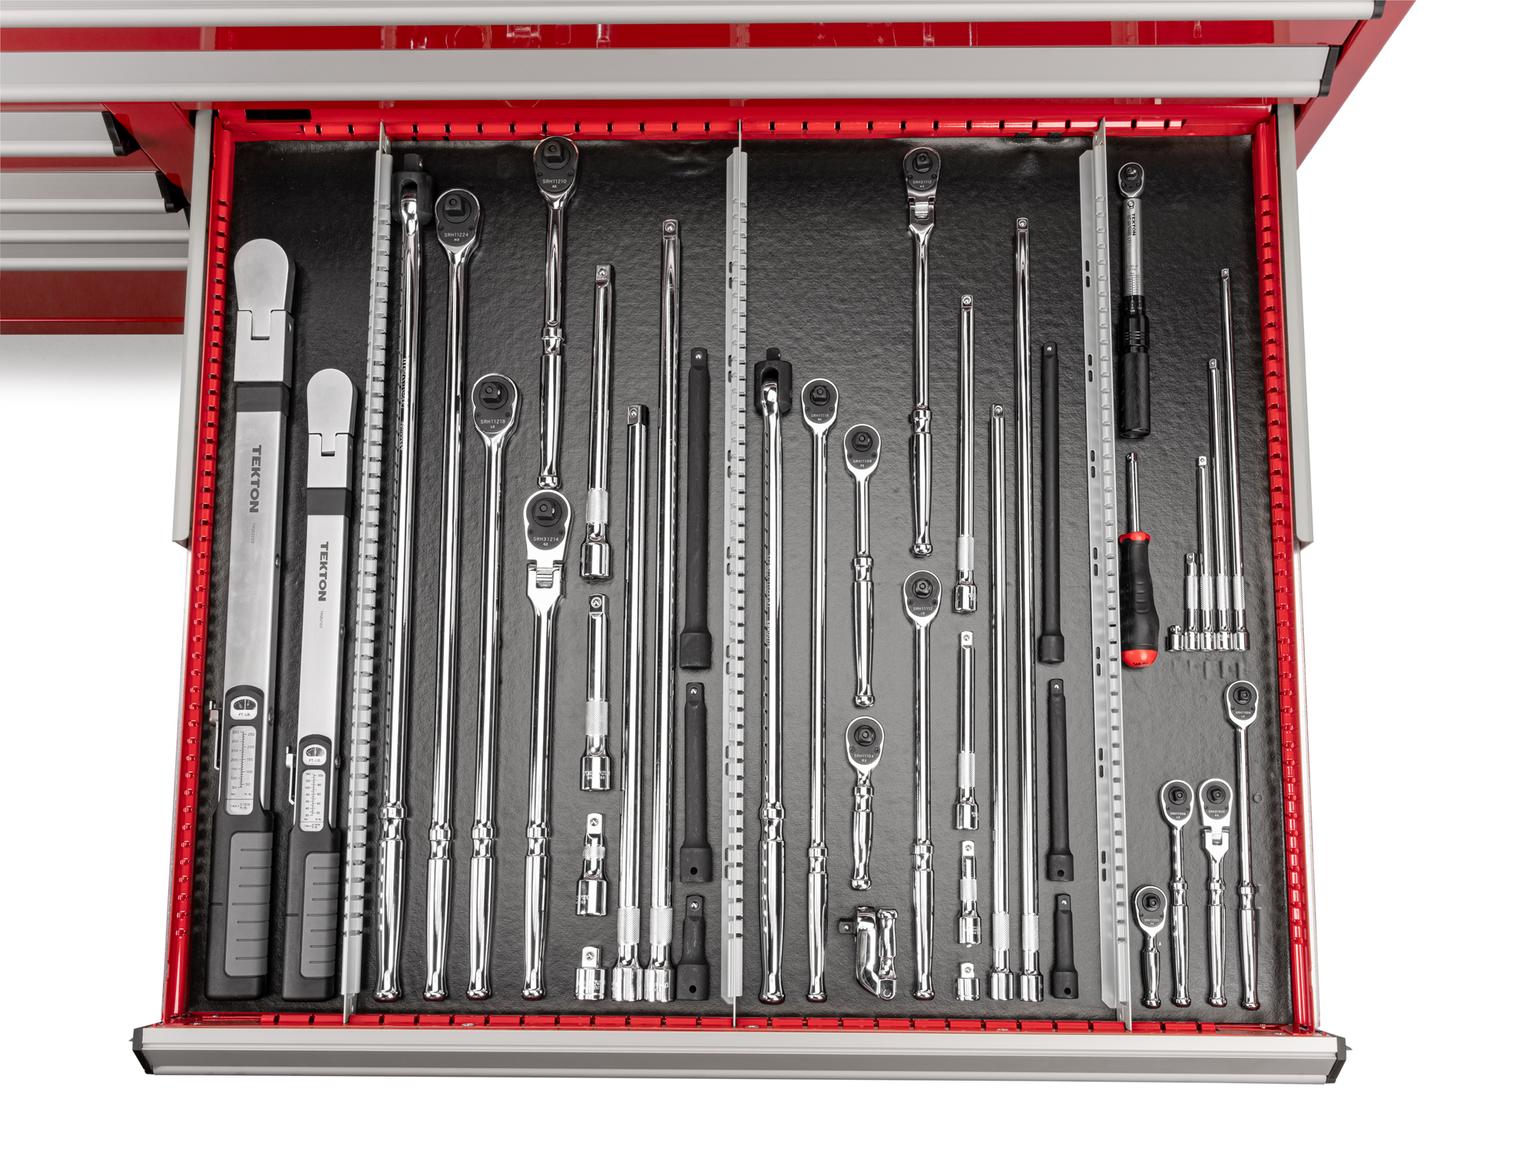 Socket Drive Tool and Extension Bundle (fits 11-Drawer 60 W x 30 D in. Cabinets)